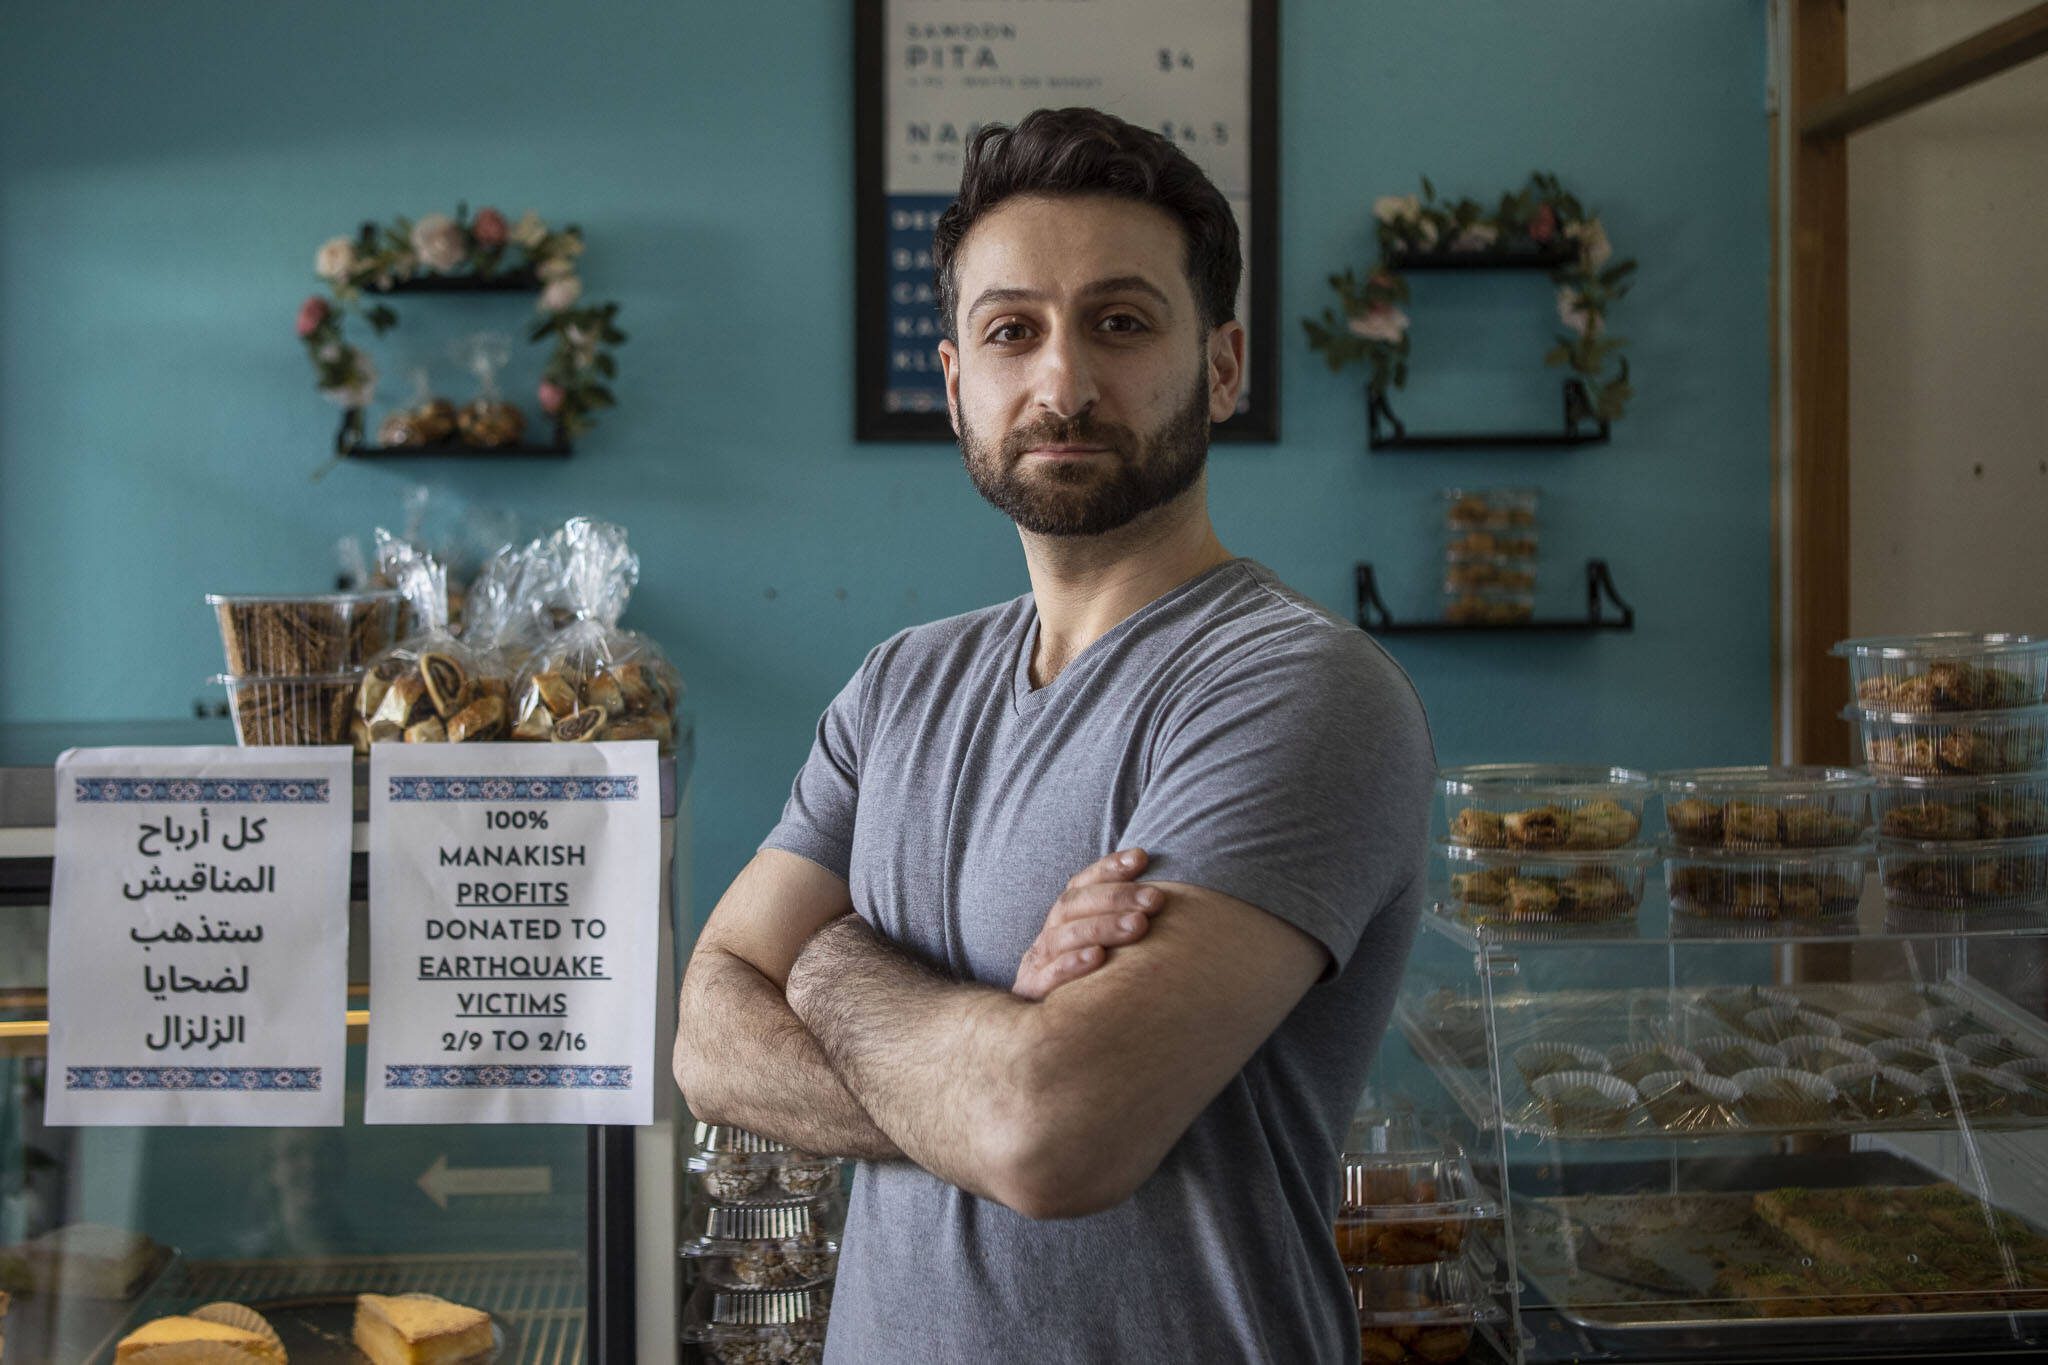 Nechirvan Zebari poses for a photo at Alida’s Bakery in Everett, Washington on Friday, Feb. 10, 2023. All manakish profits from Feb. 9 to Feb. 16 will be donated to help earthquake victims in Syria and Turkey. (Annie Barker / The Herald)